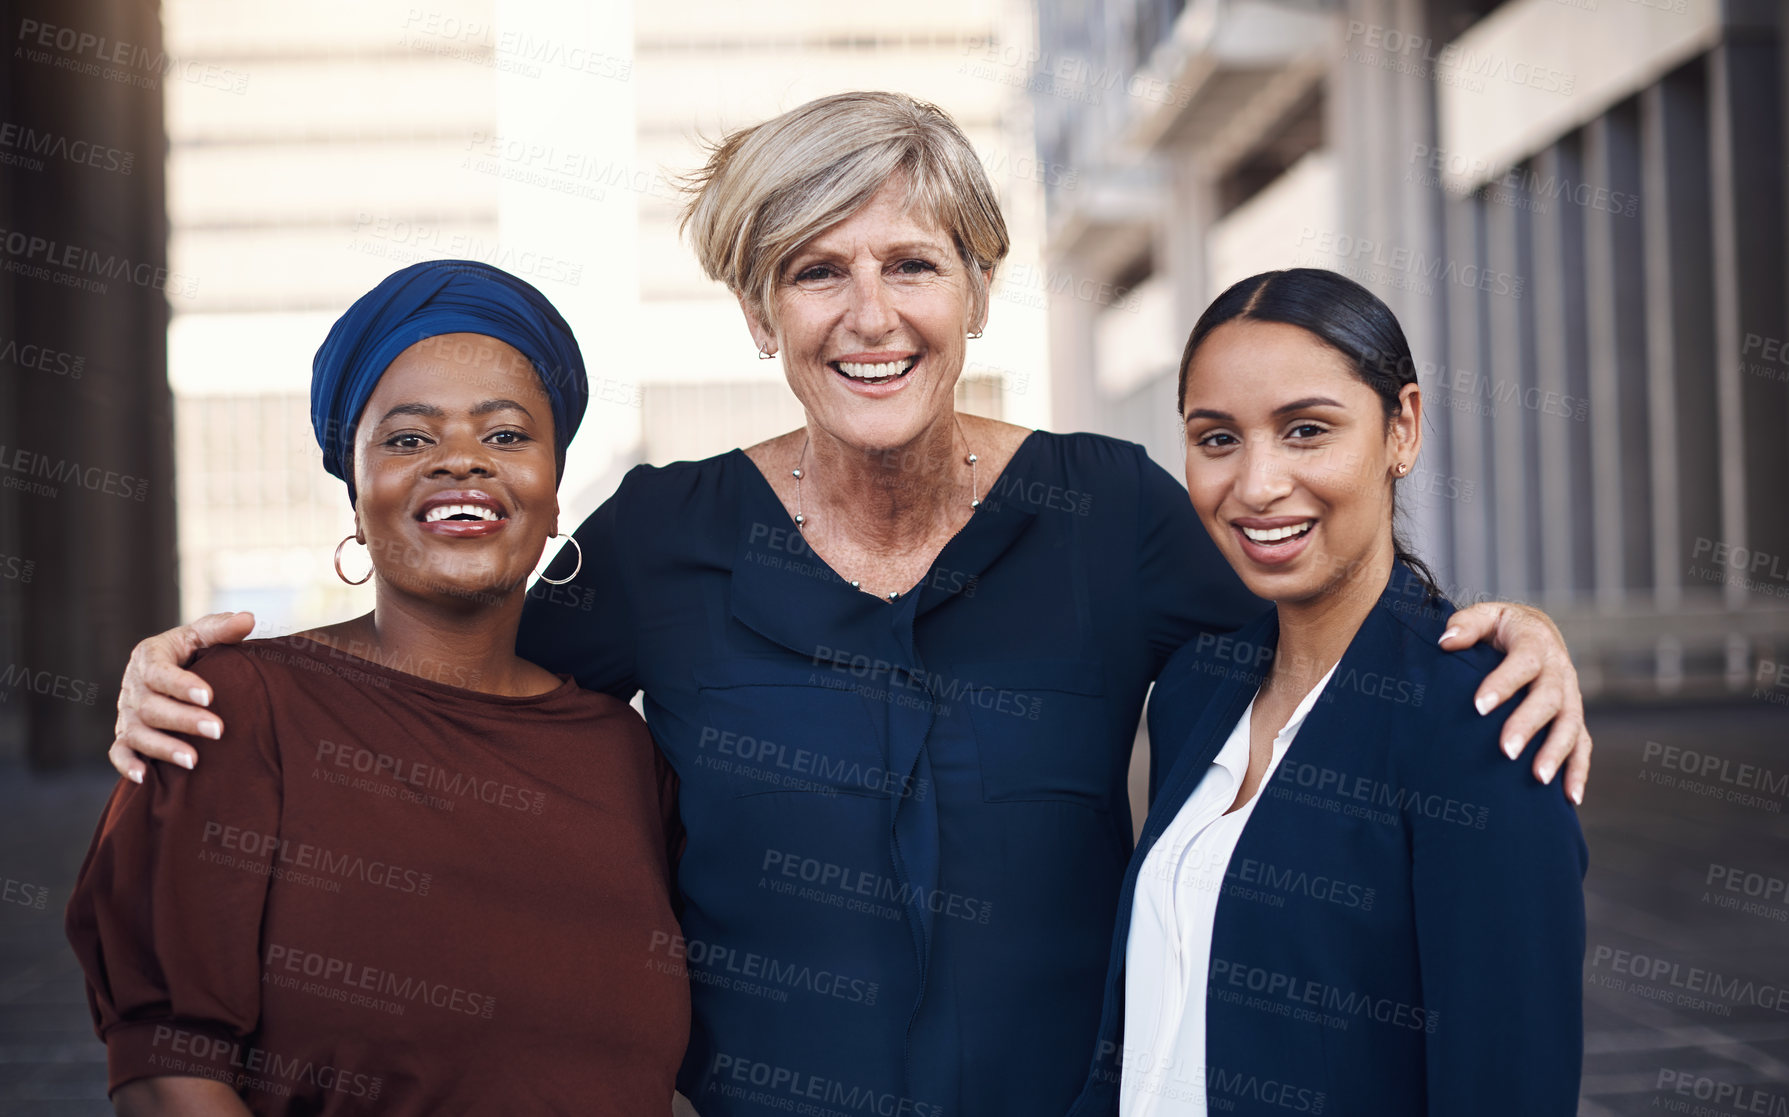 Buy stock photo Portrait of a group of businesswomen standing together against a city background